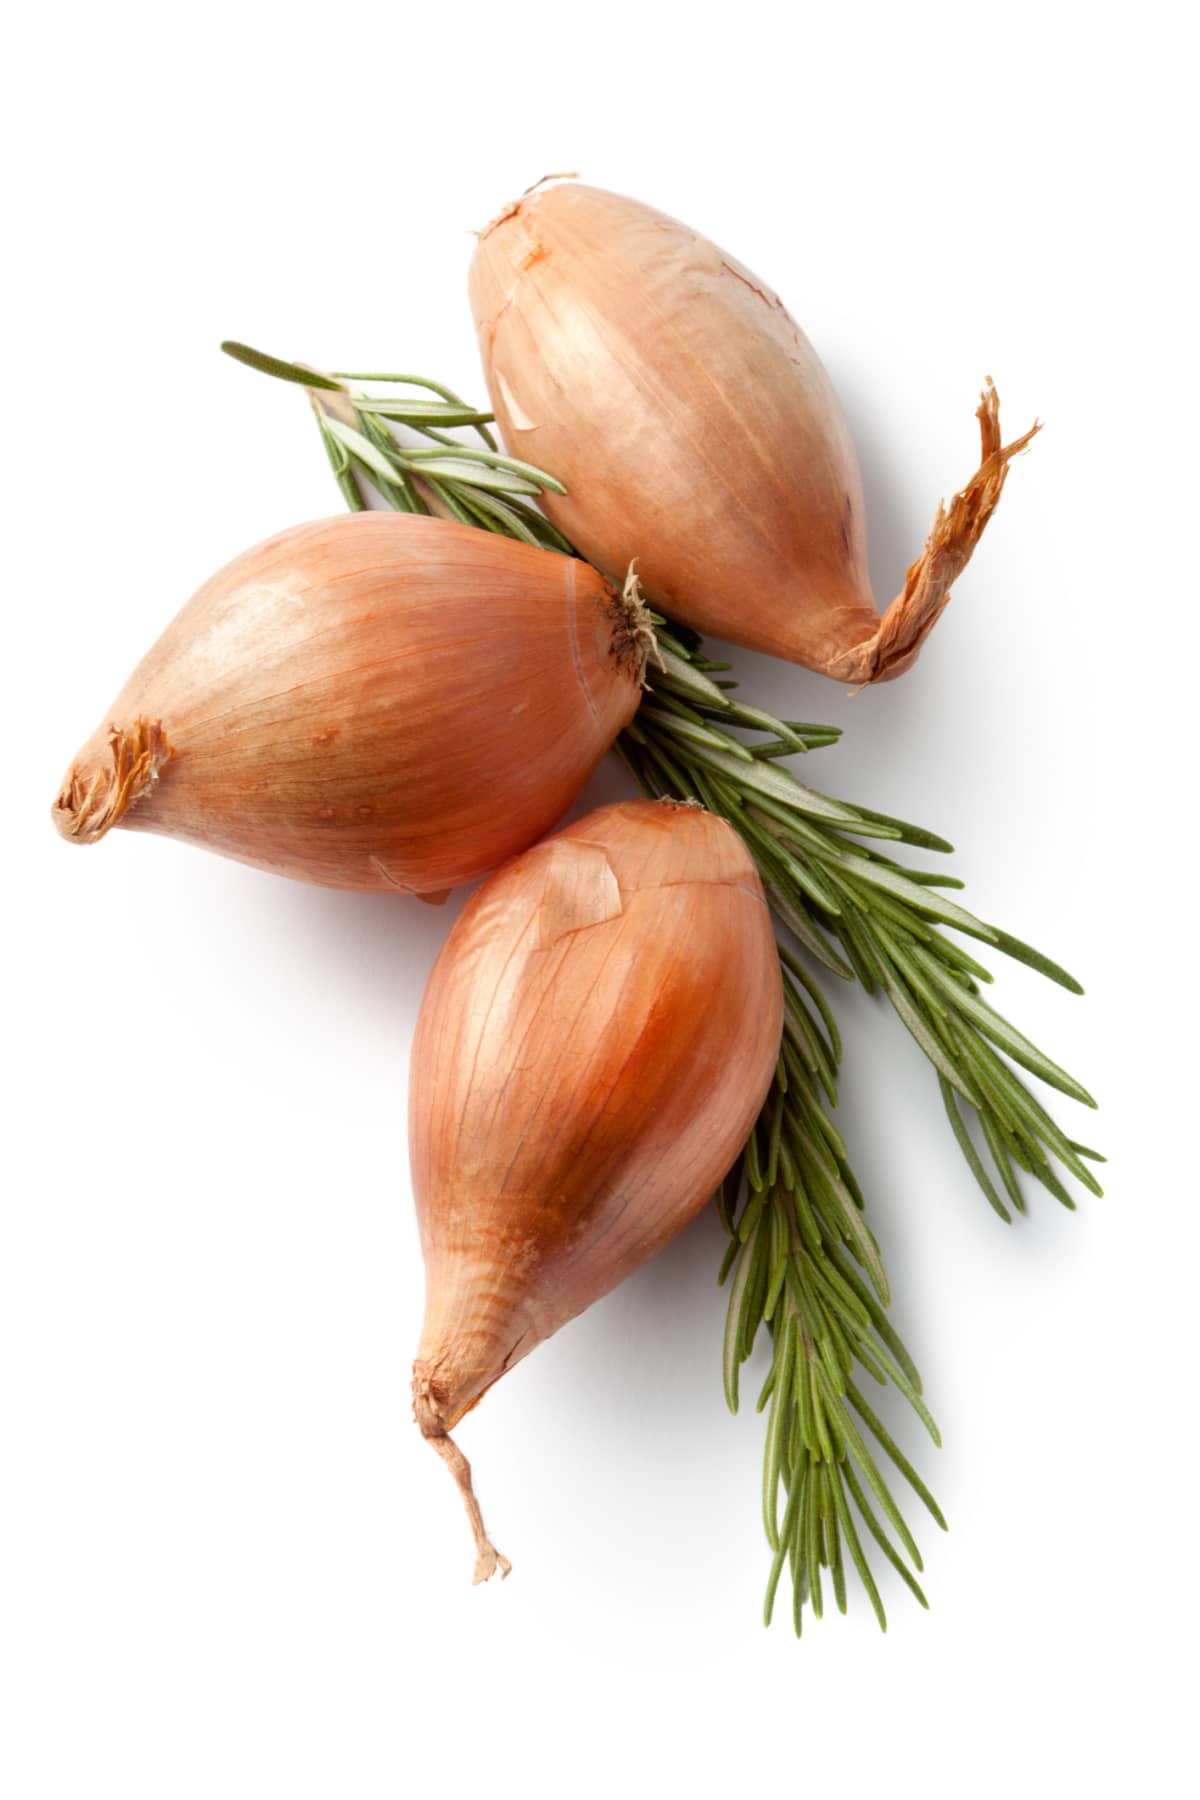 Flavouring: Shallot and Rosemary